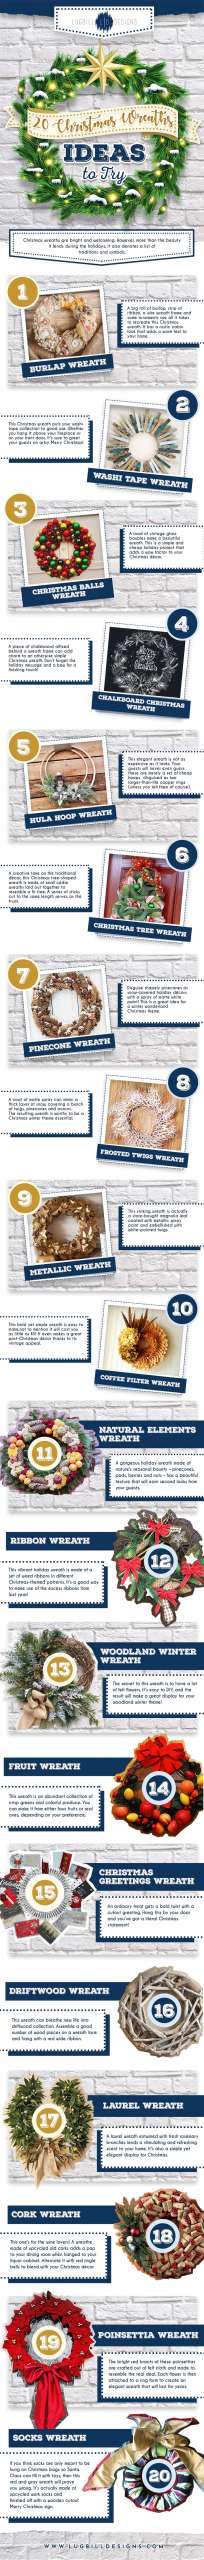 20-Christmas-Wreath-Ideas-to-Try-scaled